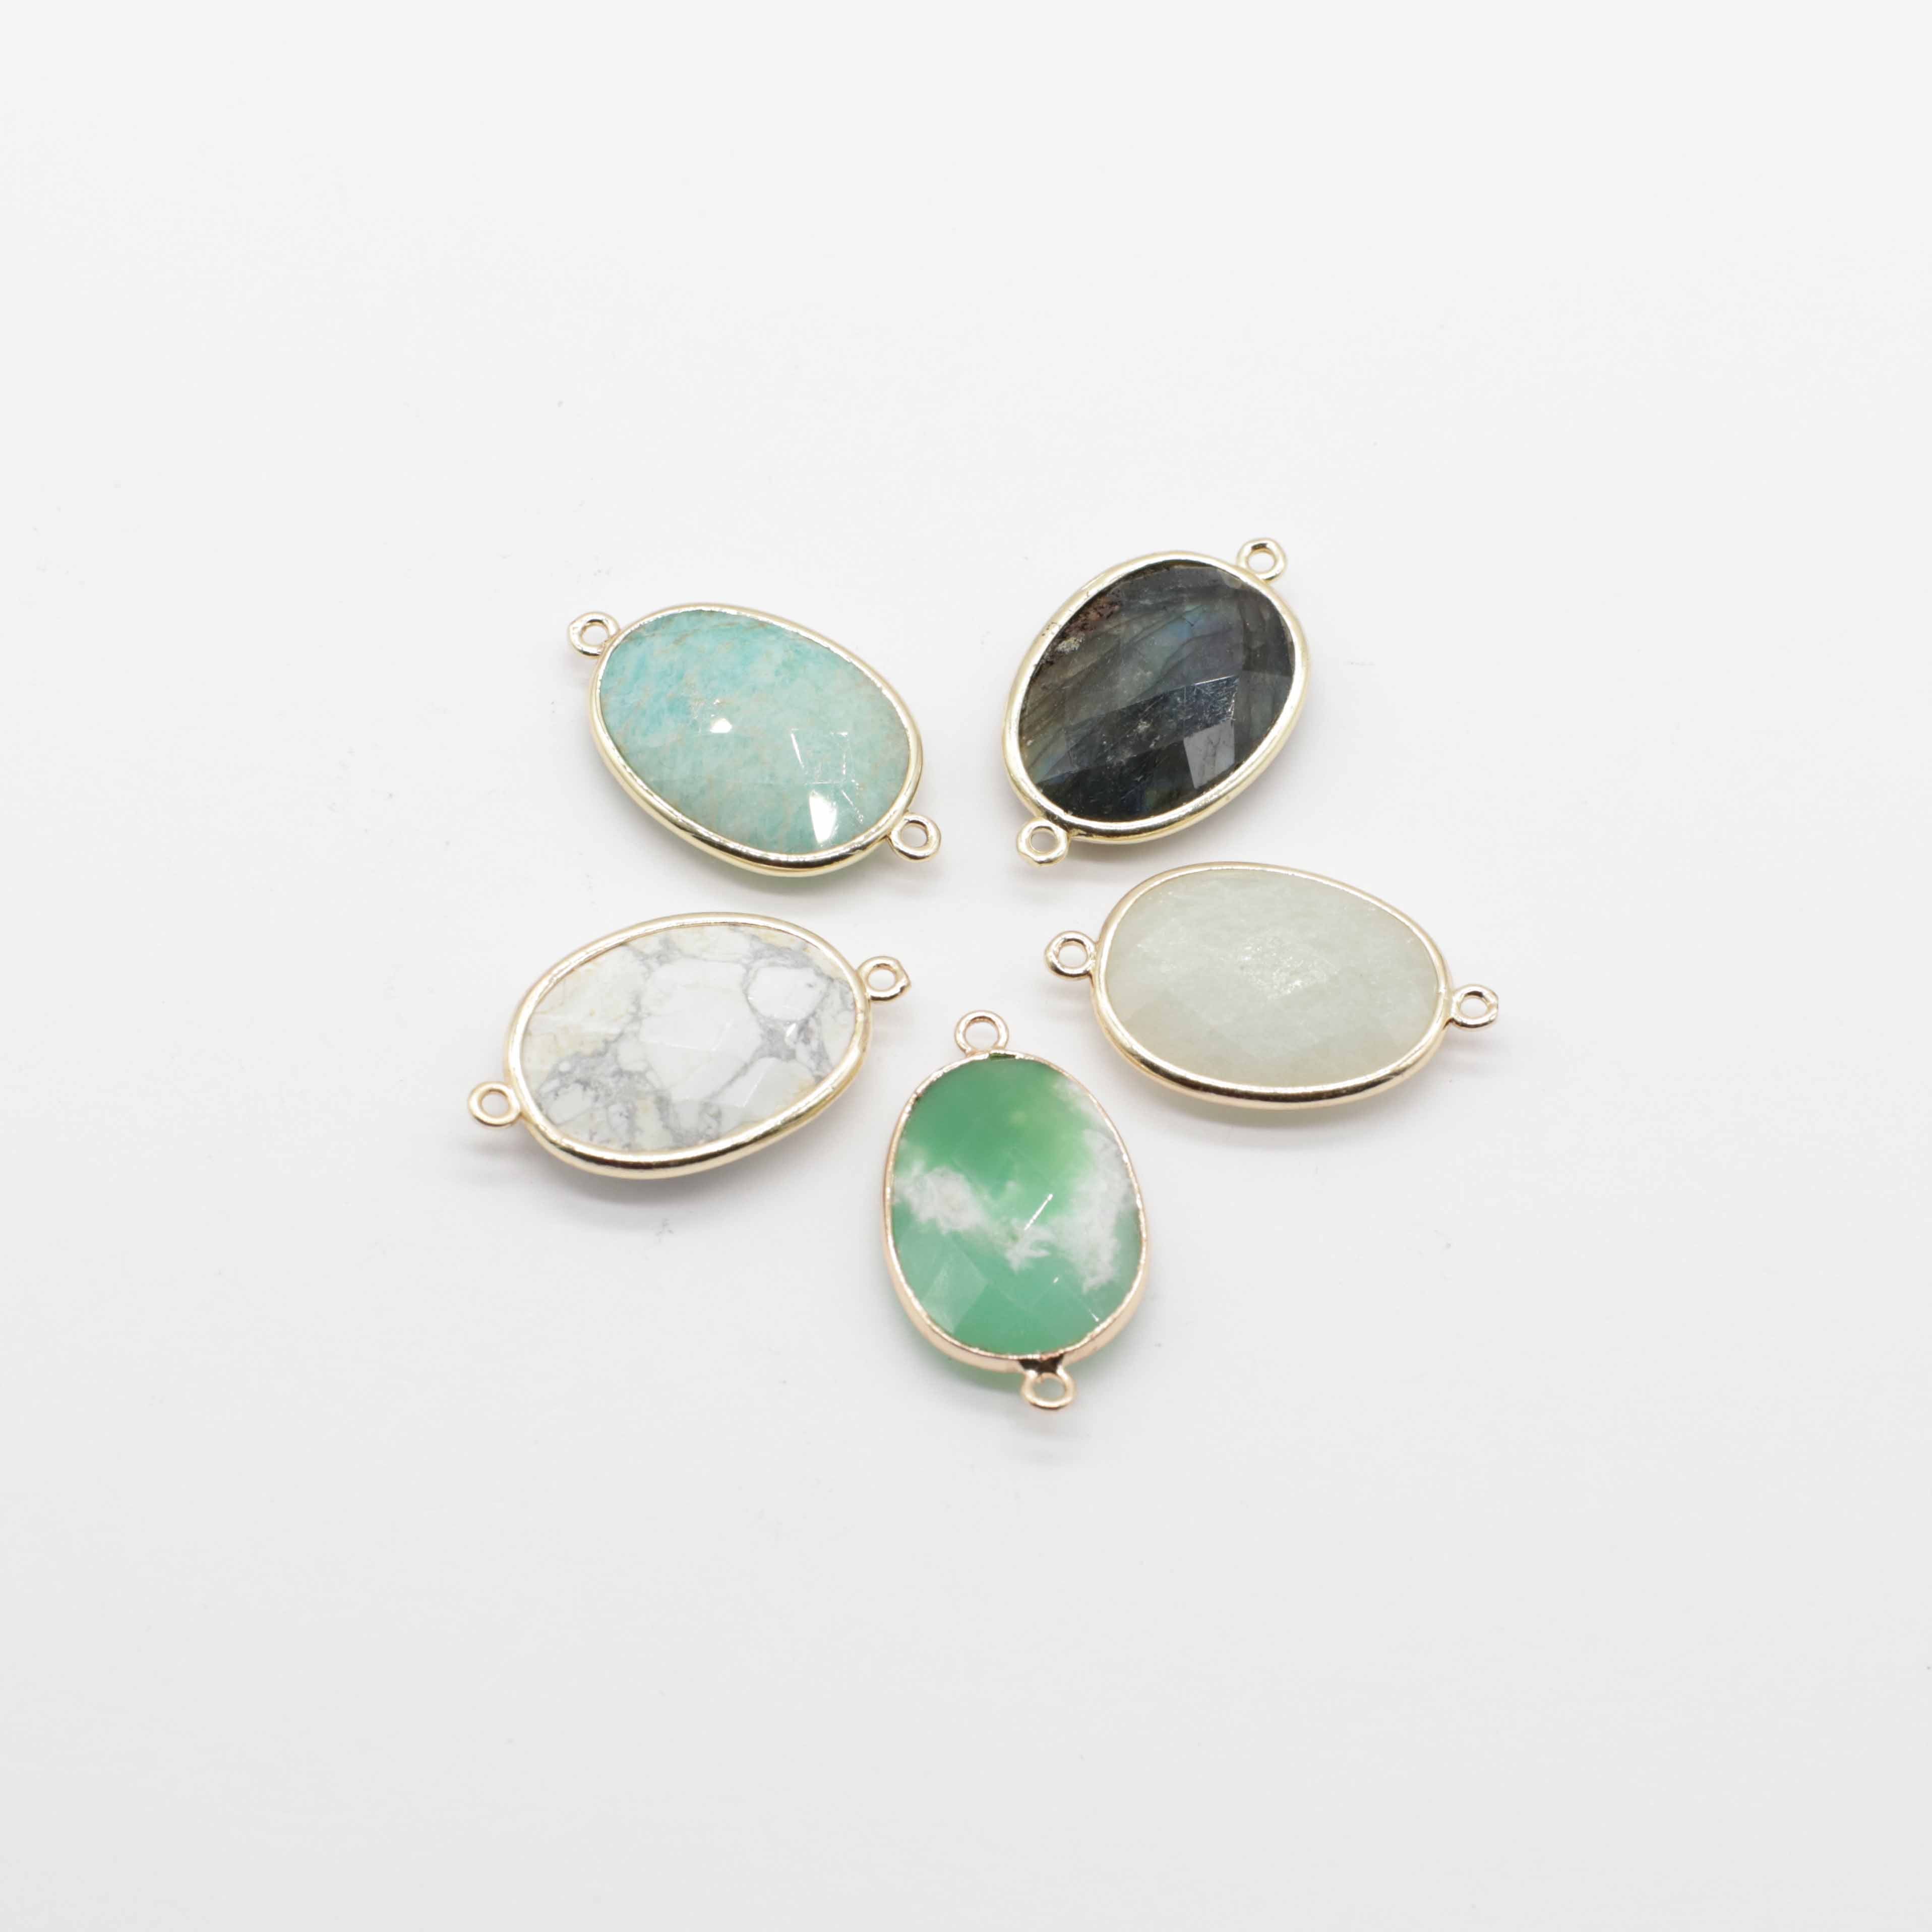 Gemstone Oval Connector With Gold Plating Edge Jewelry Design Fitting Accessories Chrysoprase Decoration Price For 5 pcs